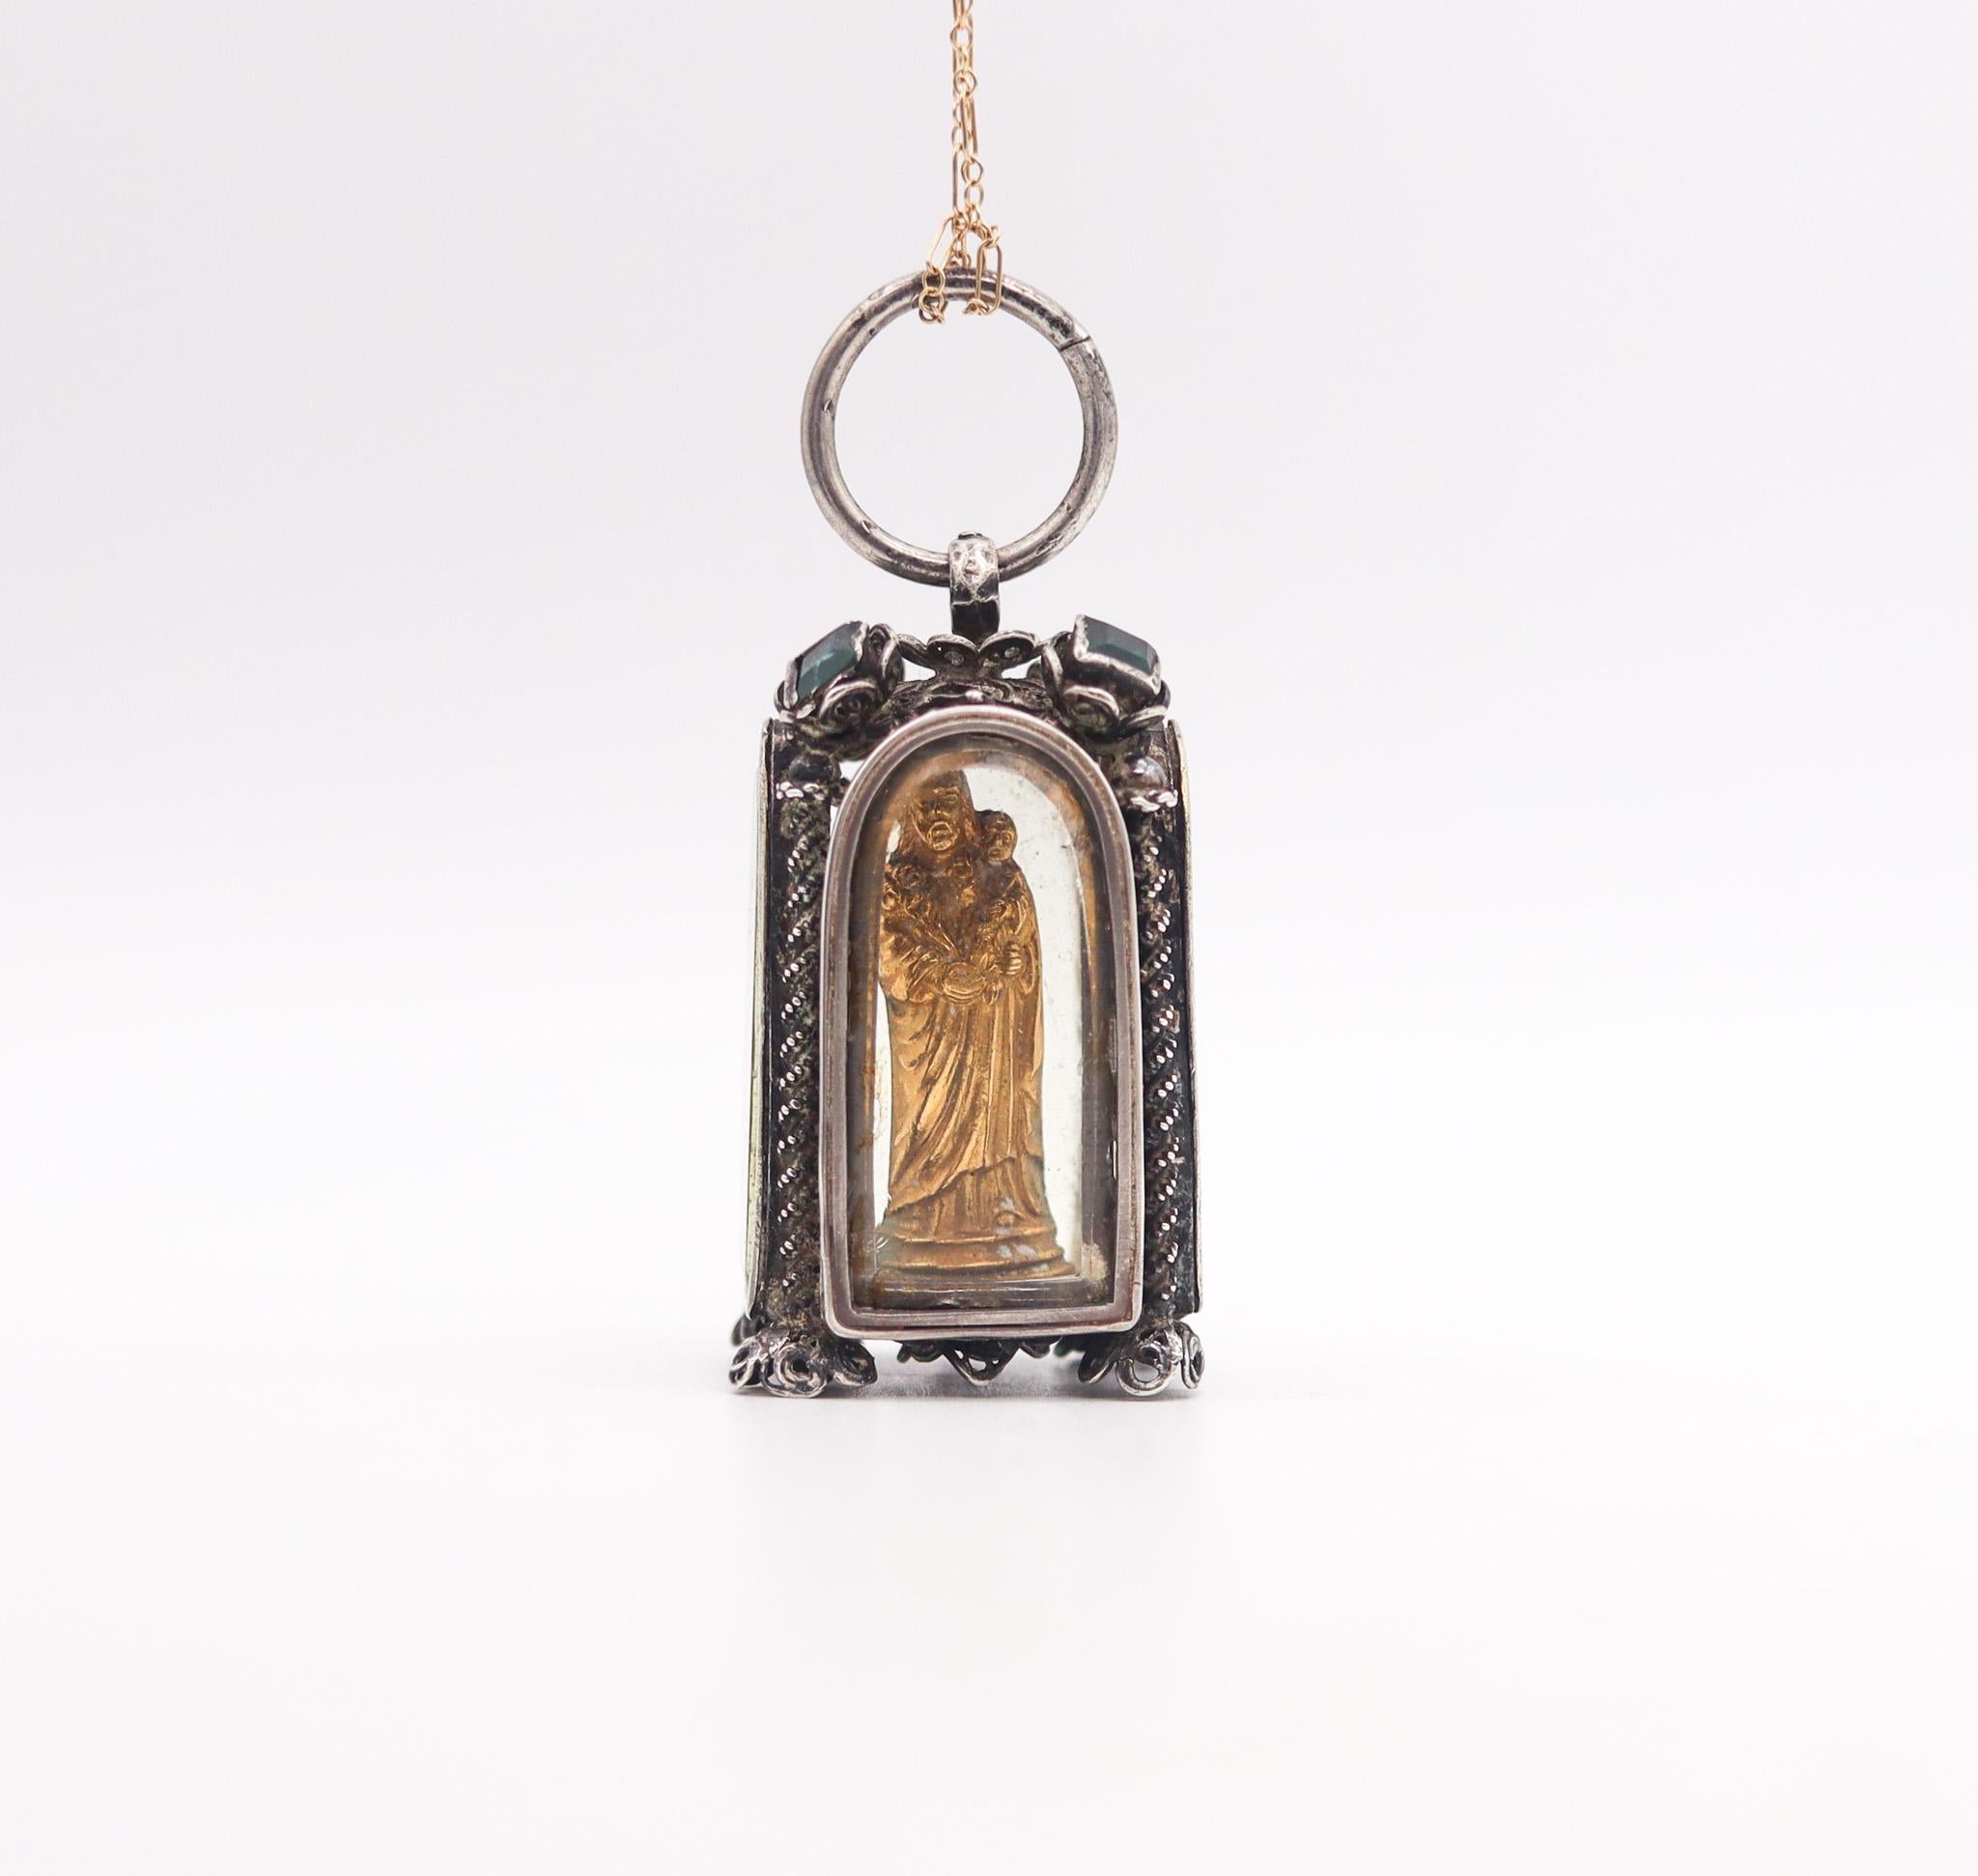 A Spanish colonial reliquary with St. Joseph.

A very rare early Spanish colonial large pendant in the shape of a reliquary, created in the Americas back in the late 18th century. It was crafted in three dimensions with gorgeous details in fine